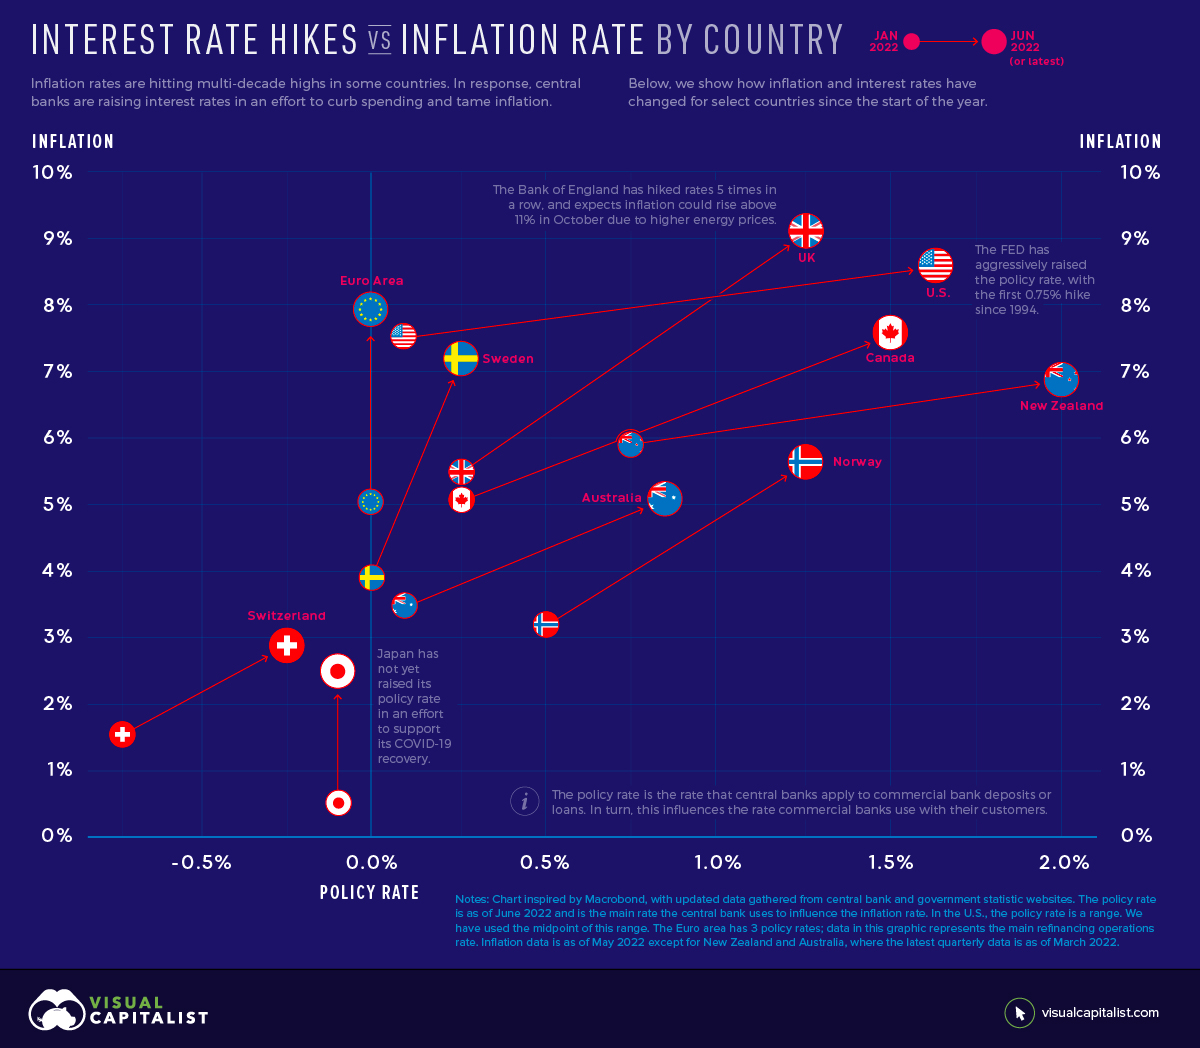 Interest Rate Hikes vs. Inflation Rate, by Country